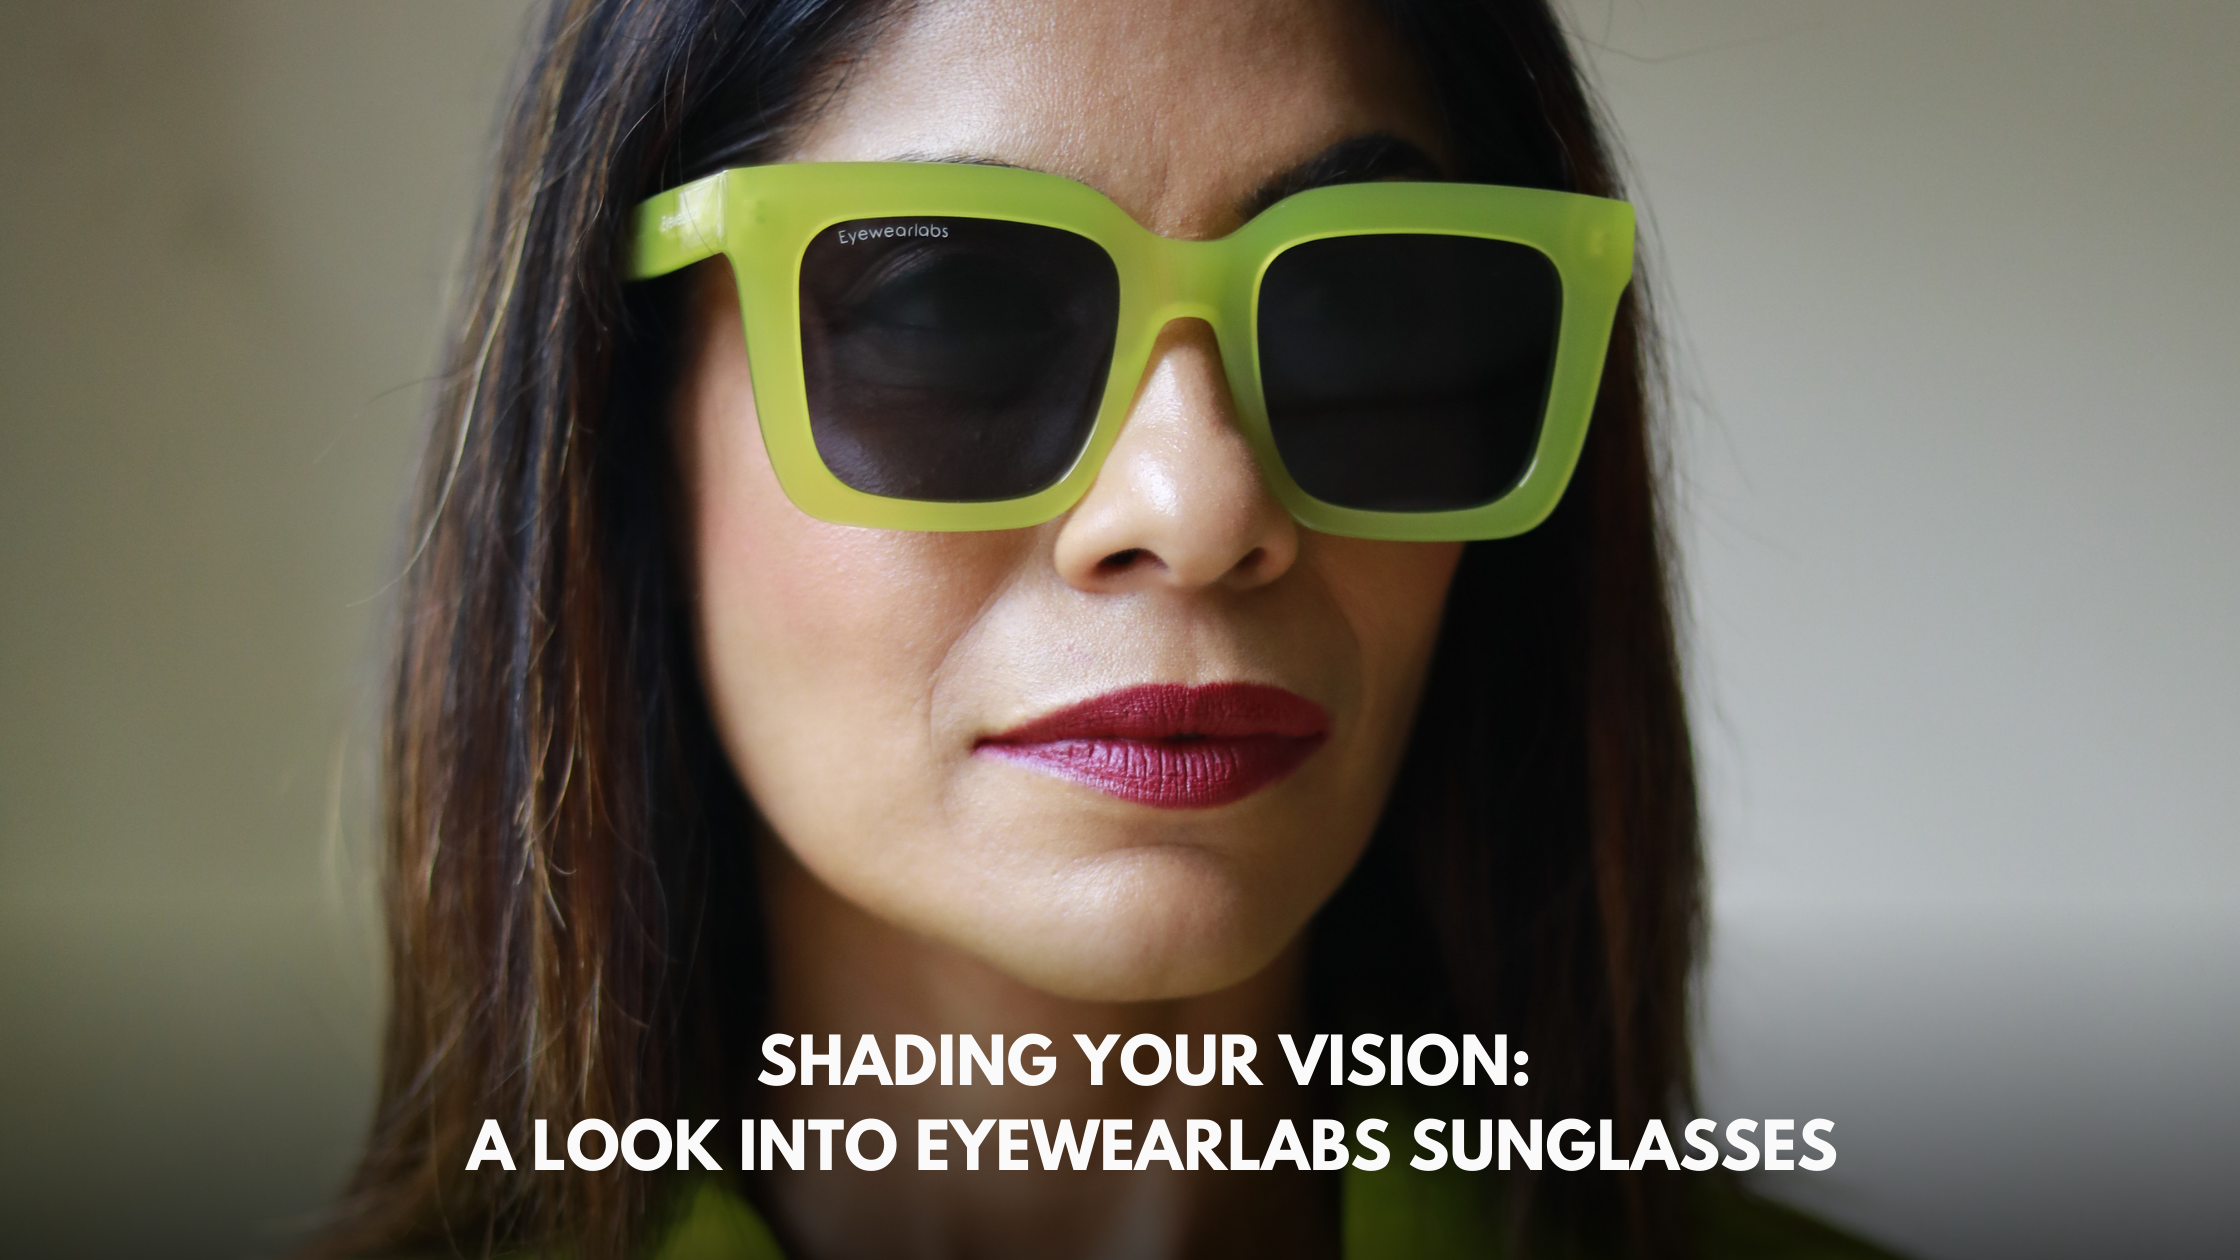 Shading Your Vision: A Look into Eyewearlabs Sunglasses